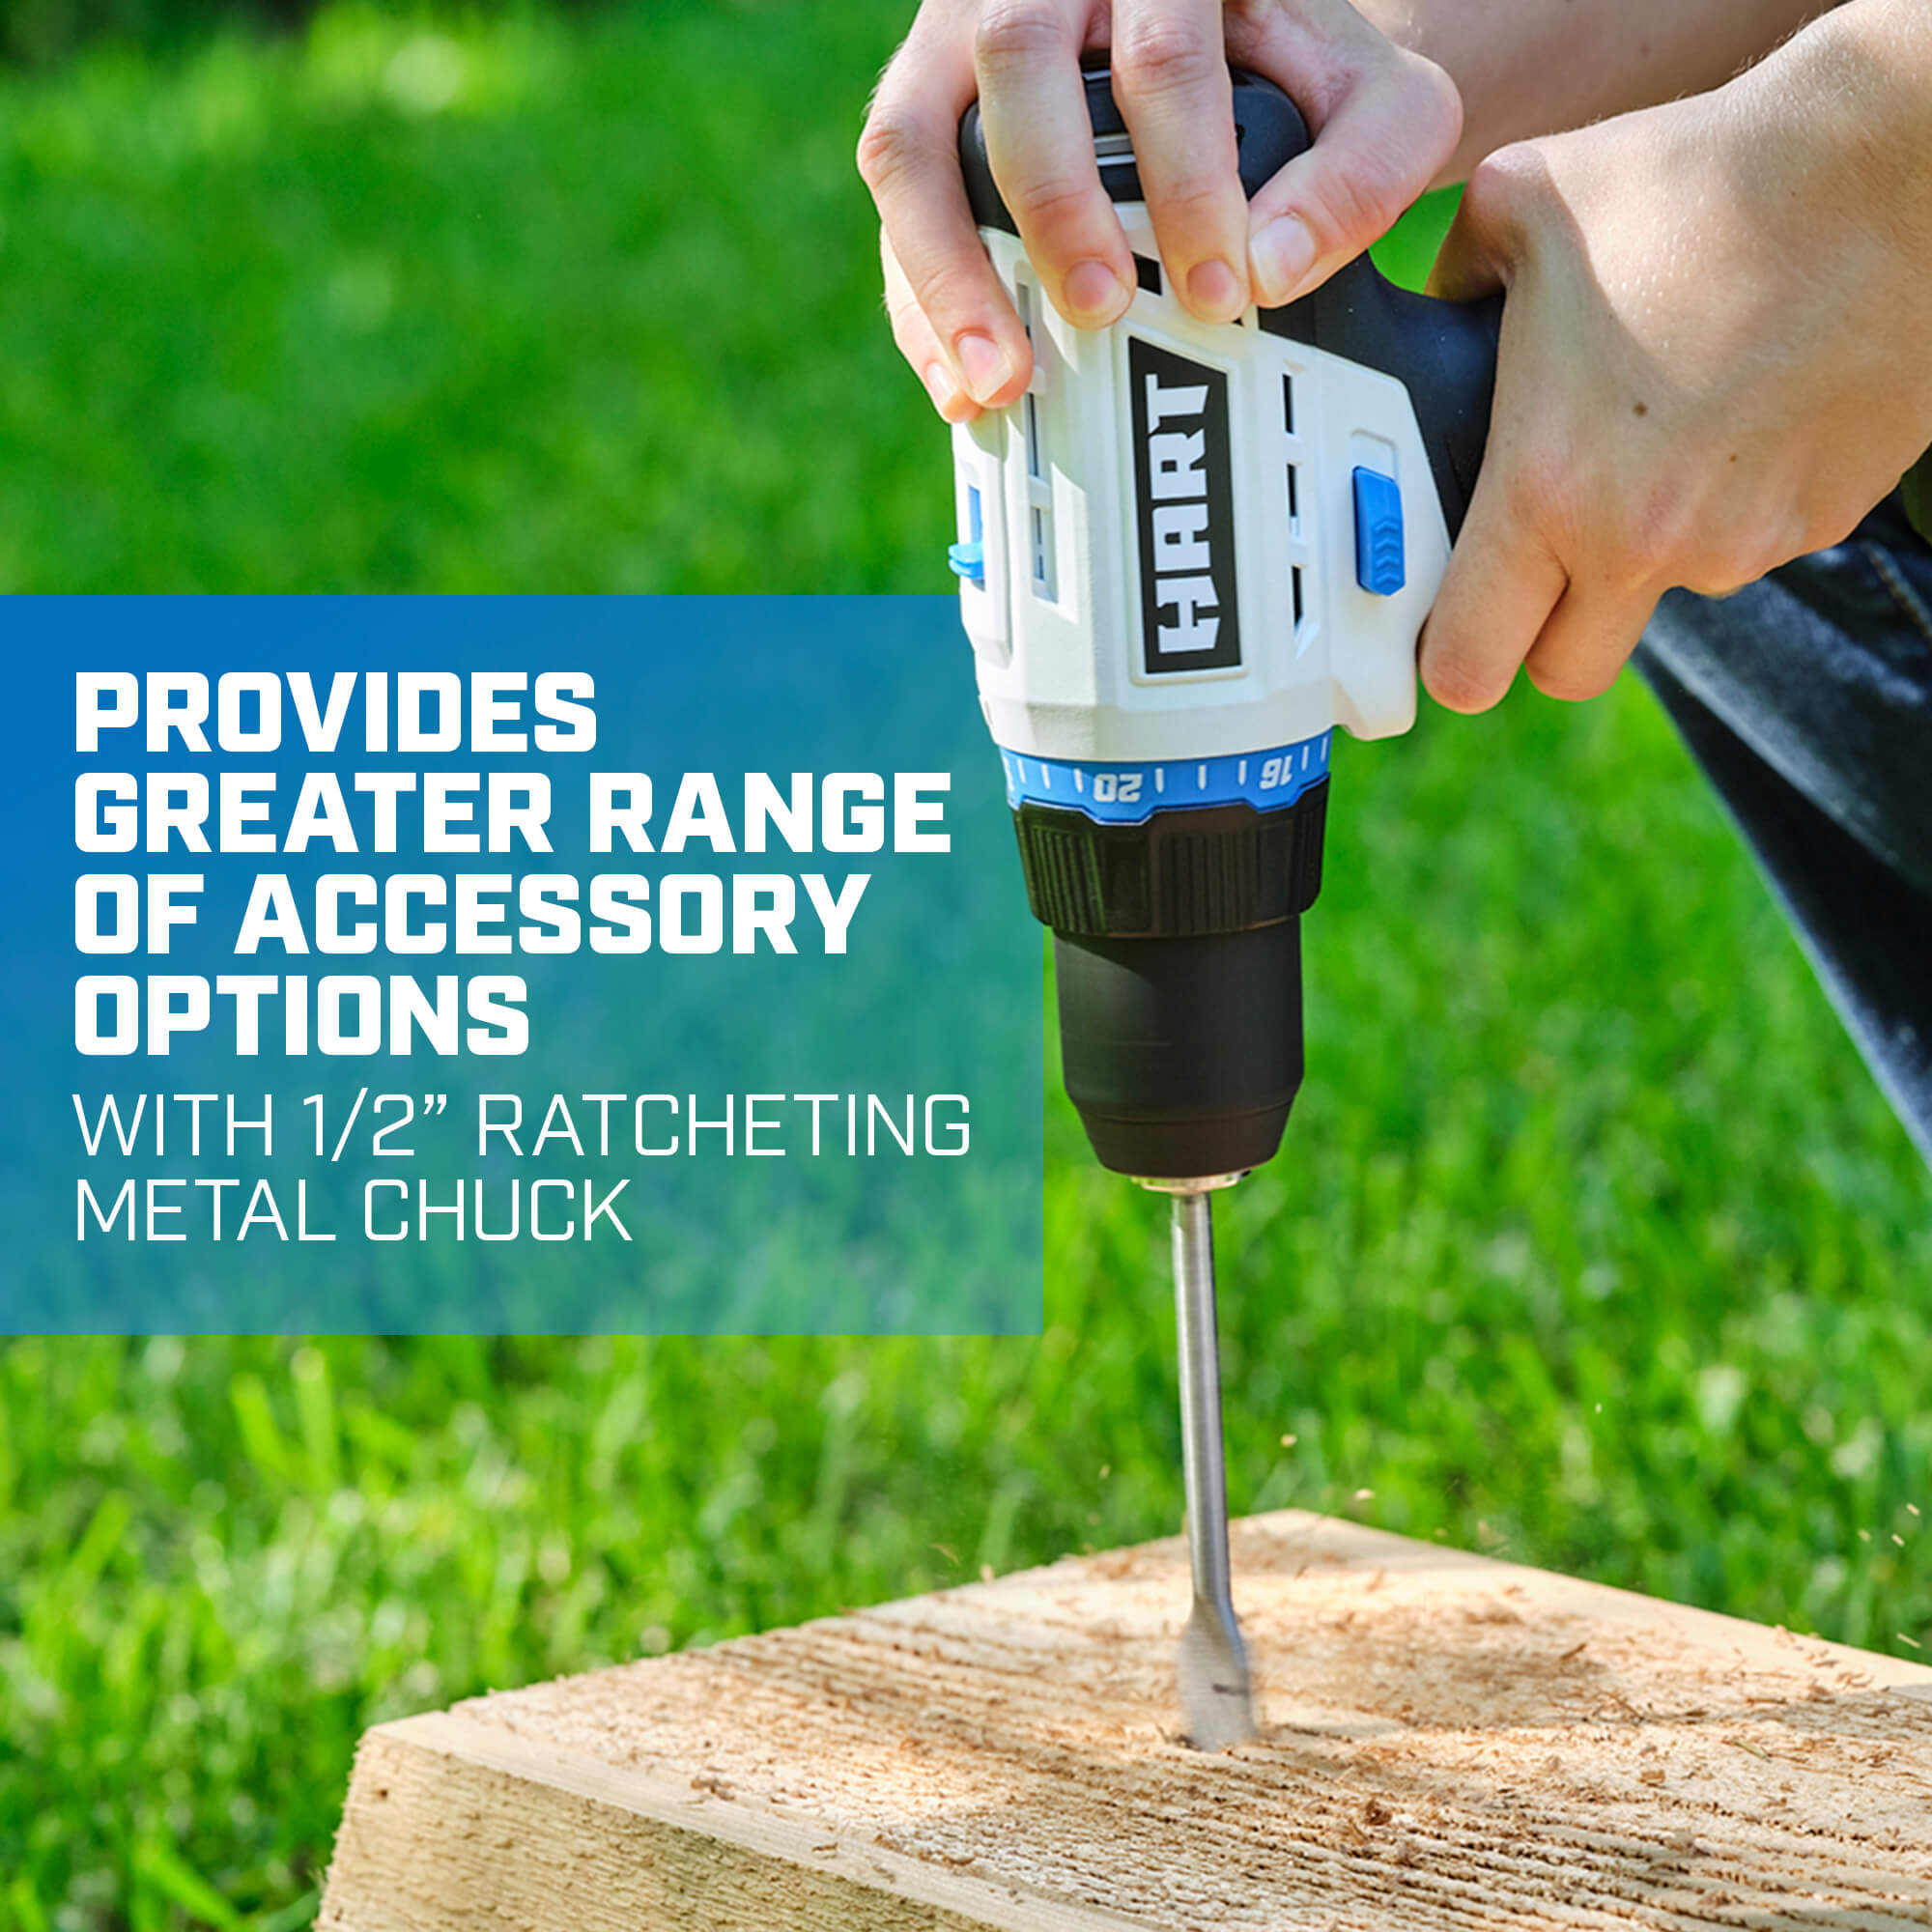 provides greater range of accessory options with 1/2" ratcheting metal chuck